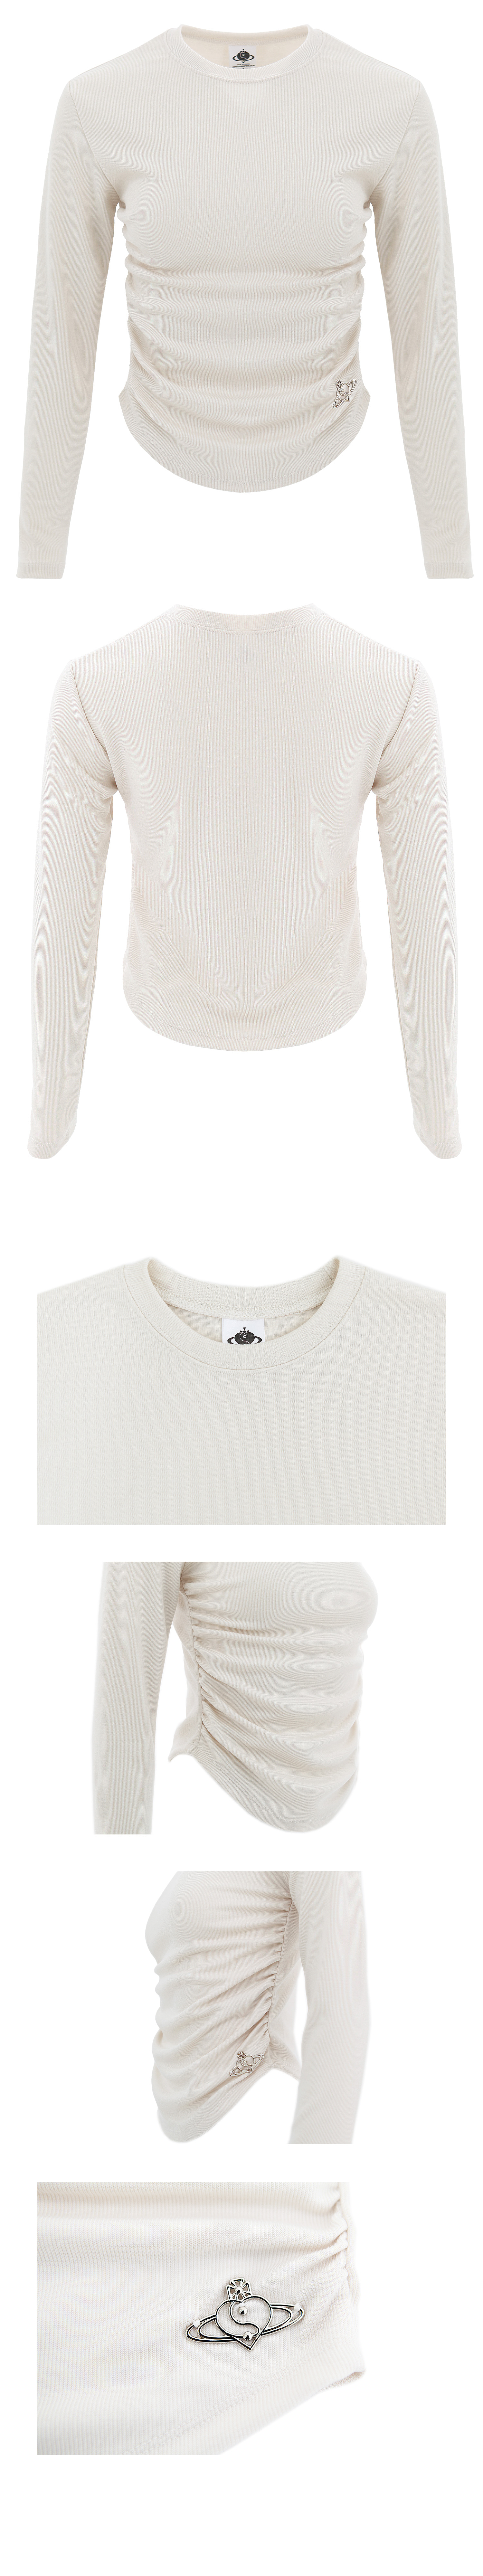 ANDANTE T-SHIRT IN IVORY